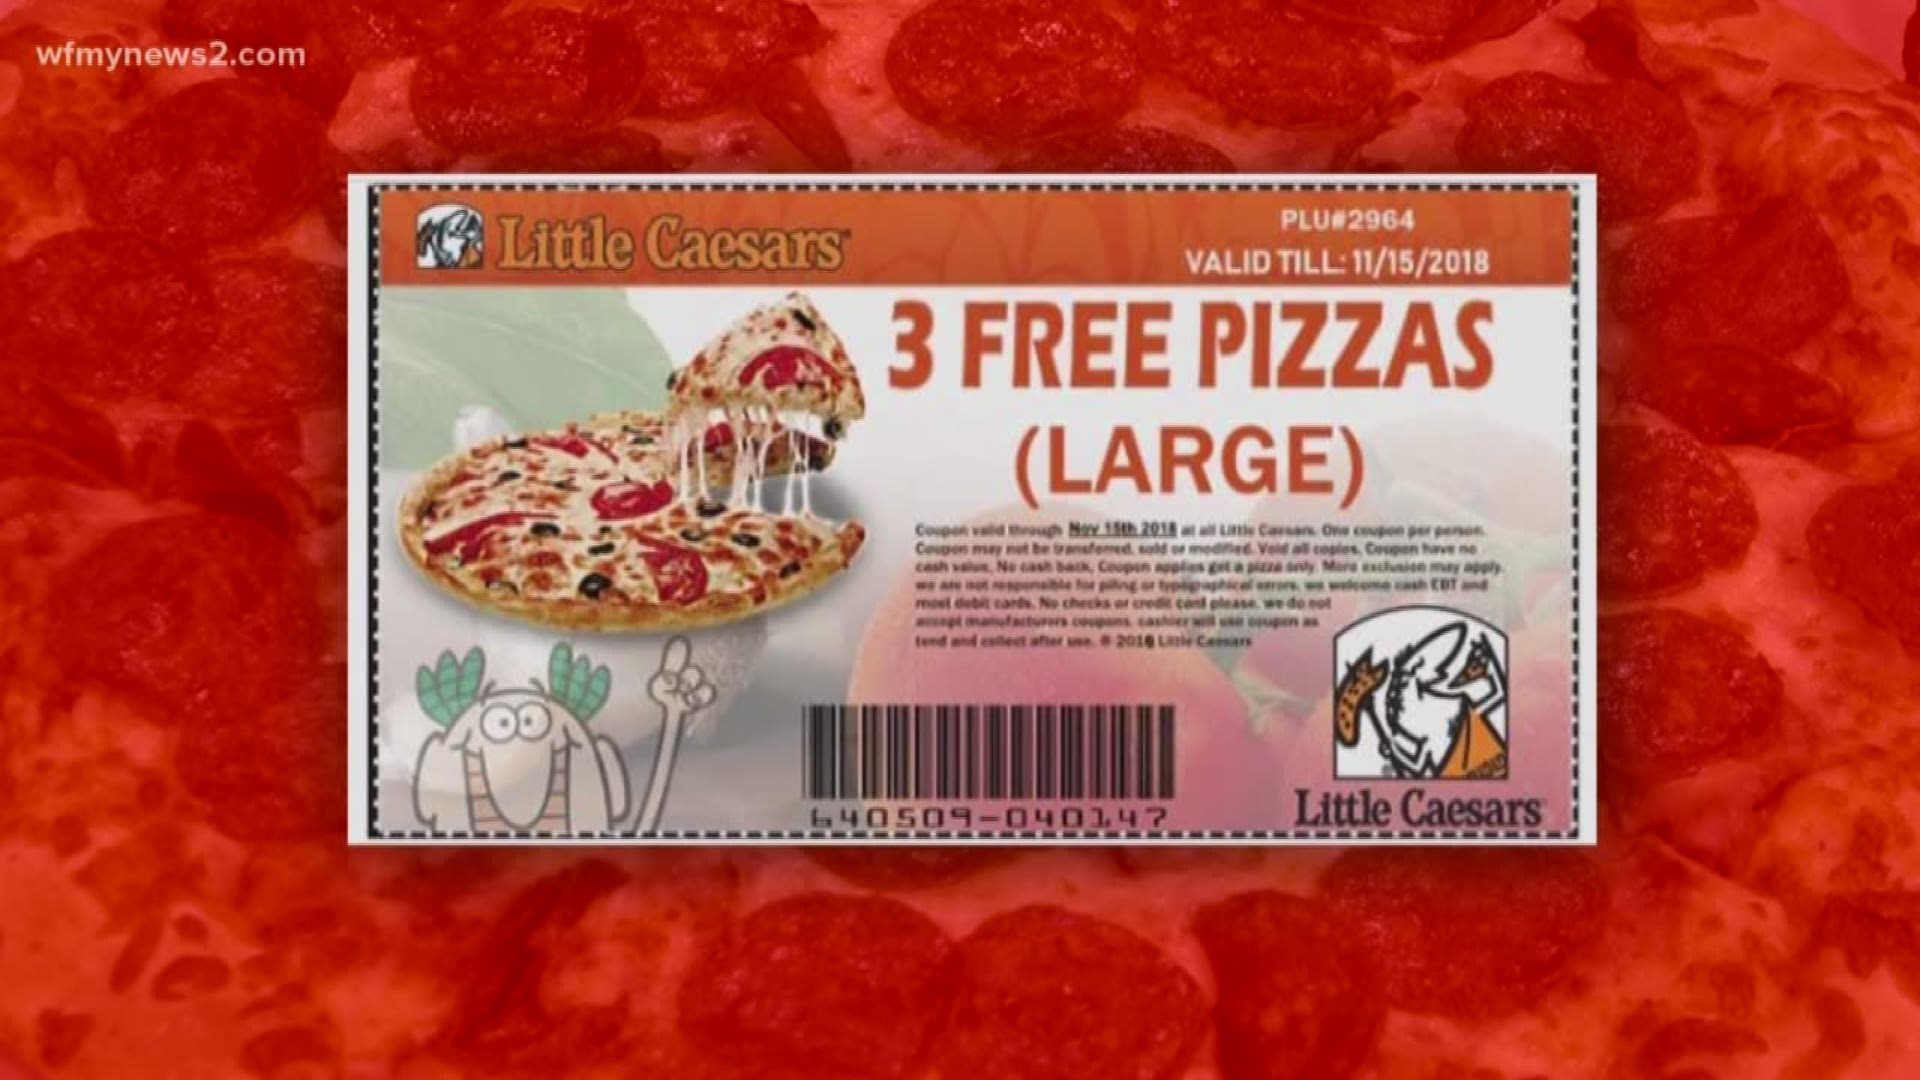 Active Little Caesars Promo Code 2020 Three Free Pizzas Yeah It S Too Good To Be True - roblox pizza day code